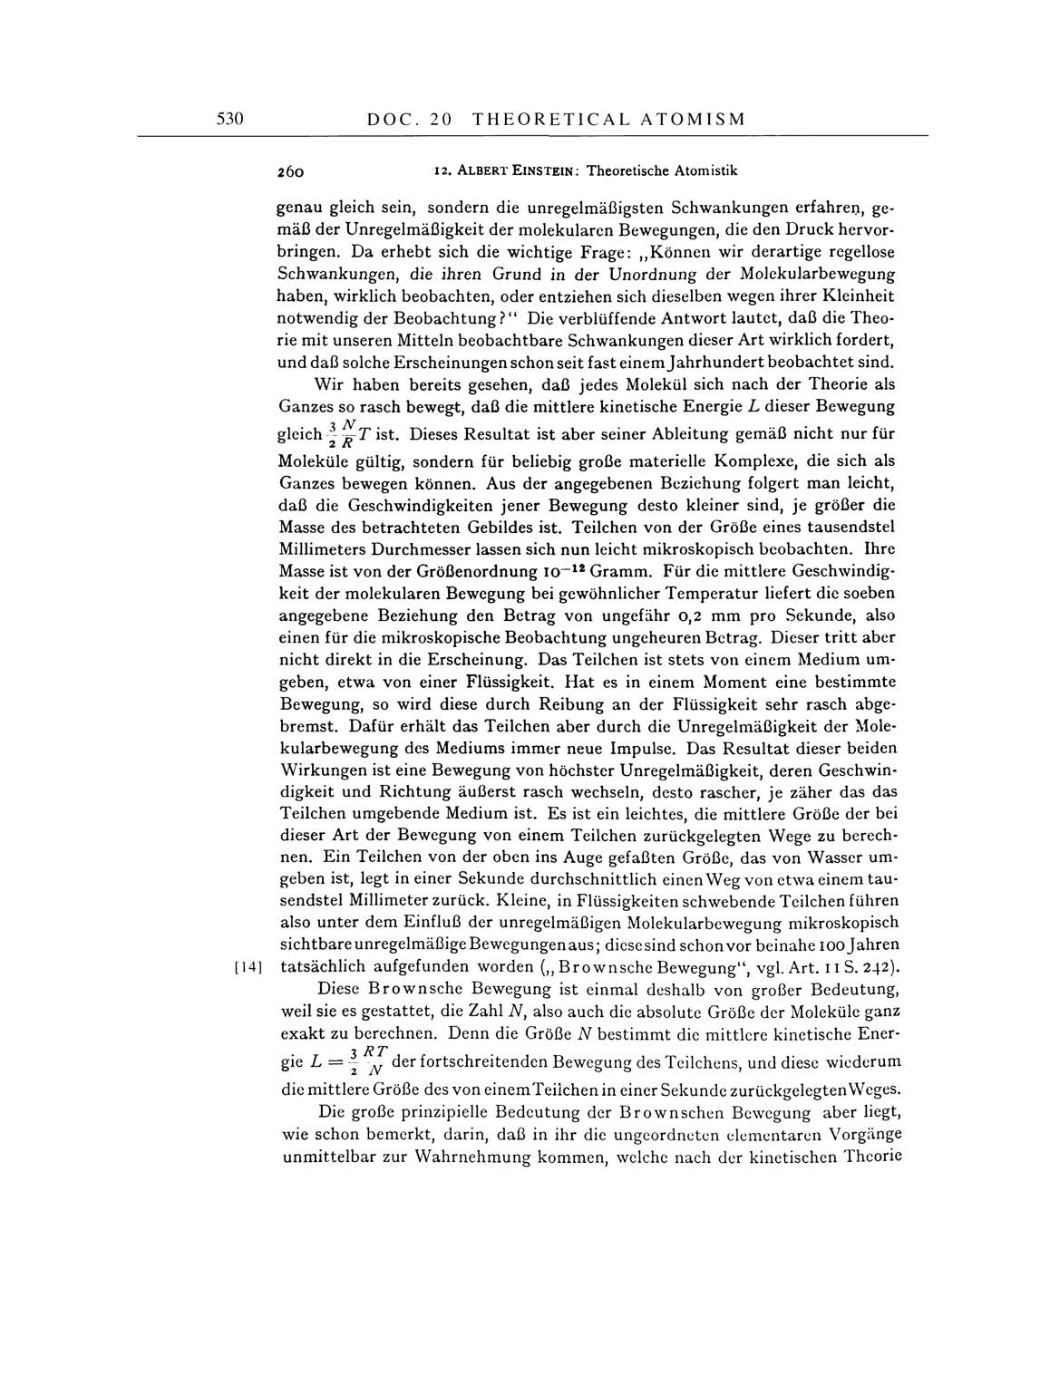 Volume 4: The Swiss Years: Writings 1912-1914 page 530